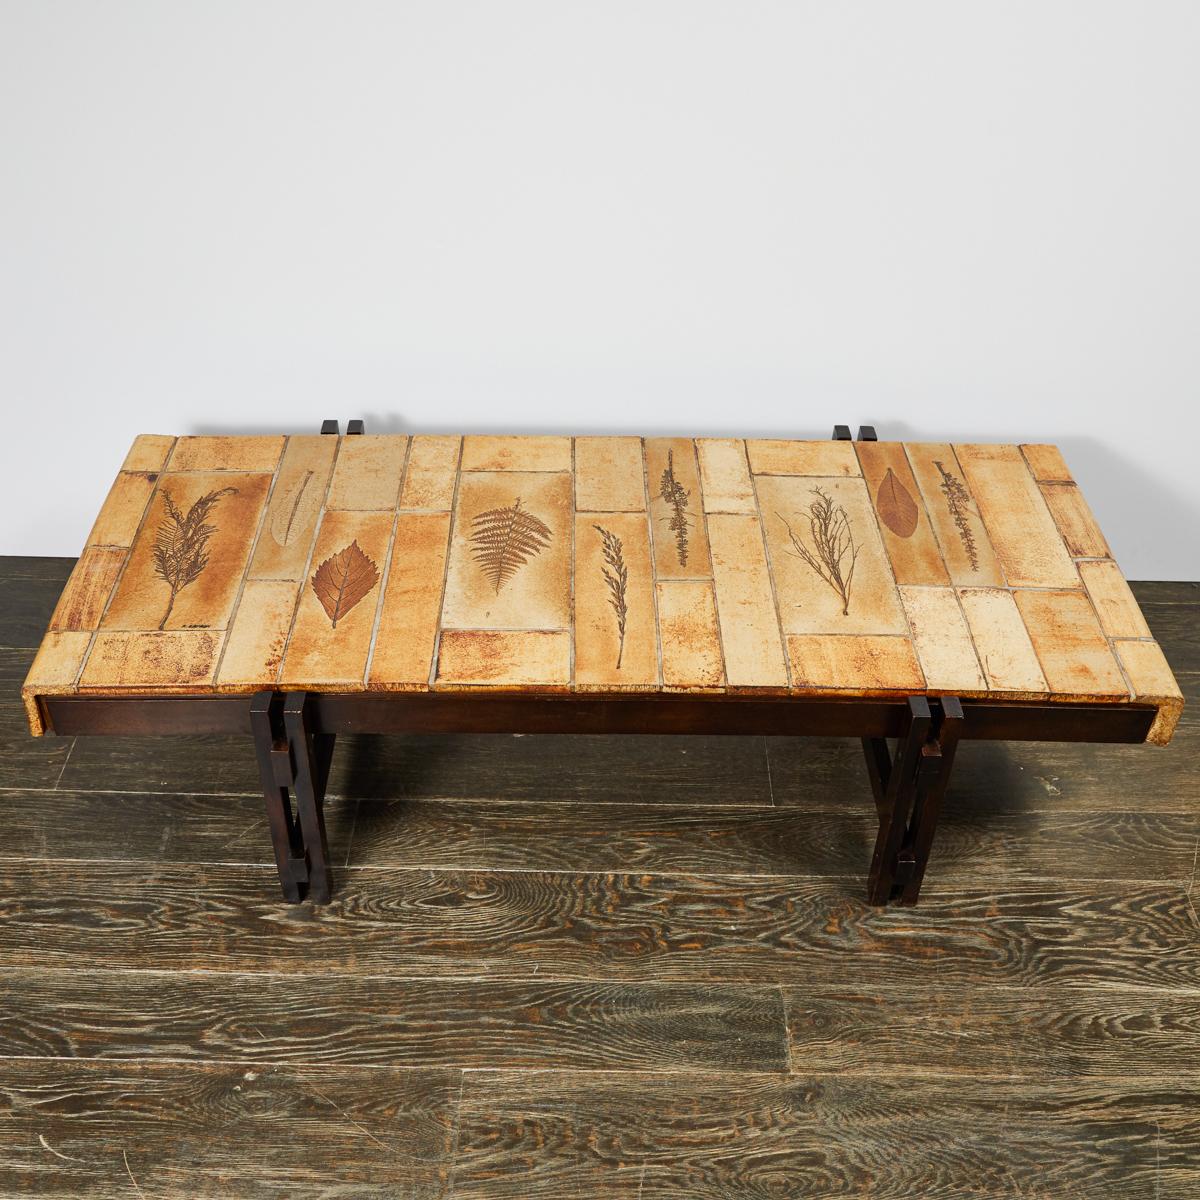 Roger Capron signed tile-top coffee table with carved walnut wood base. The tiles have been finished with a warm, golden glaze, and feature a motif of various leaf impressions. An organic yet industrial piece of French mid-century design. 

France,